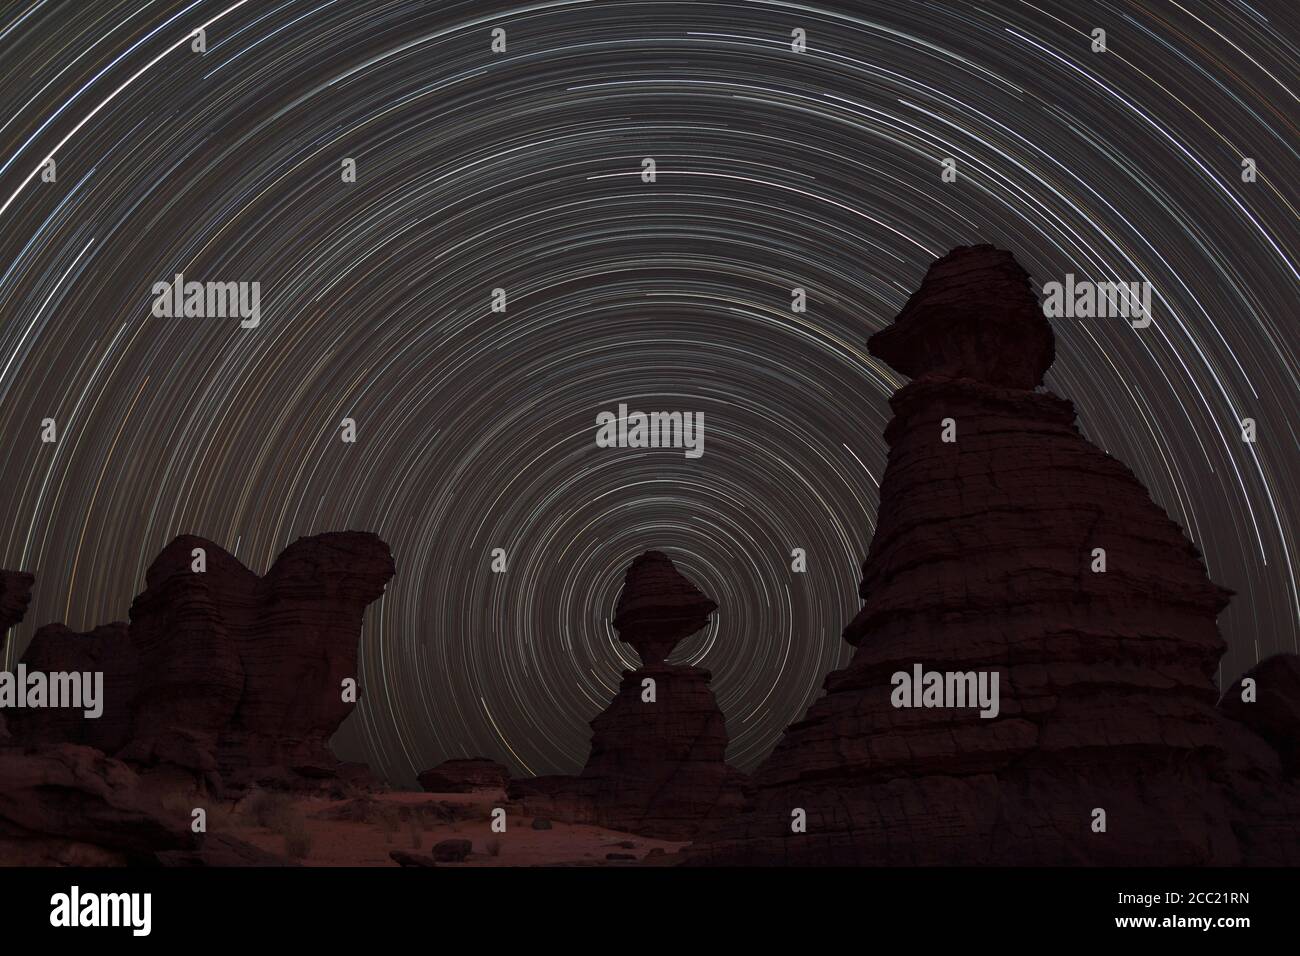 Africa, Chad, View of star trail and rock formation at Ennedi range Stock Photo